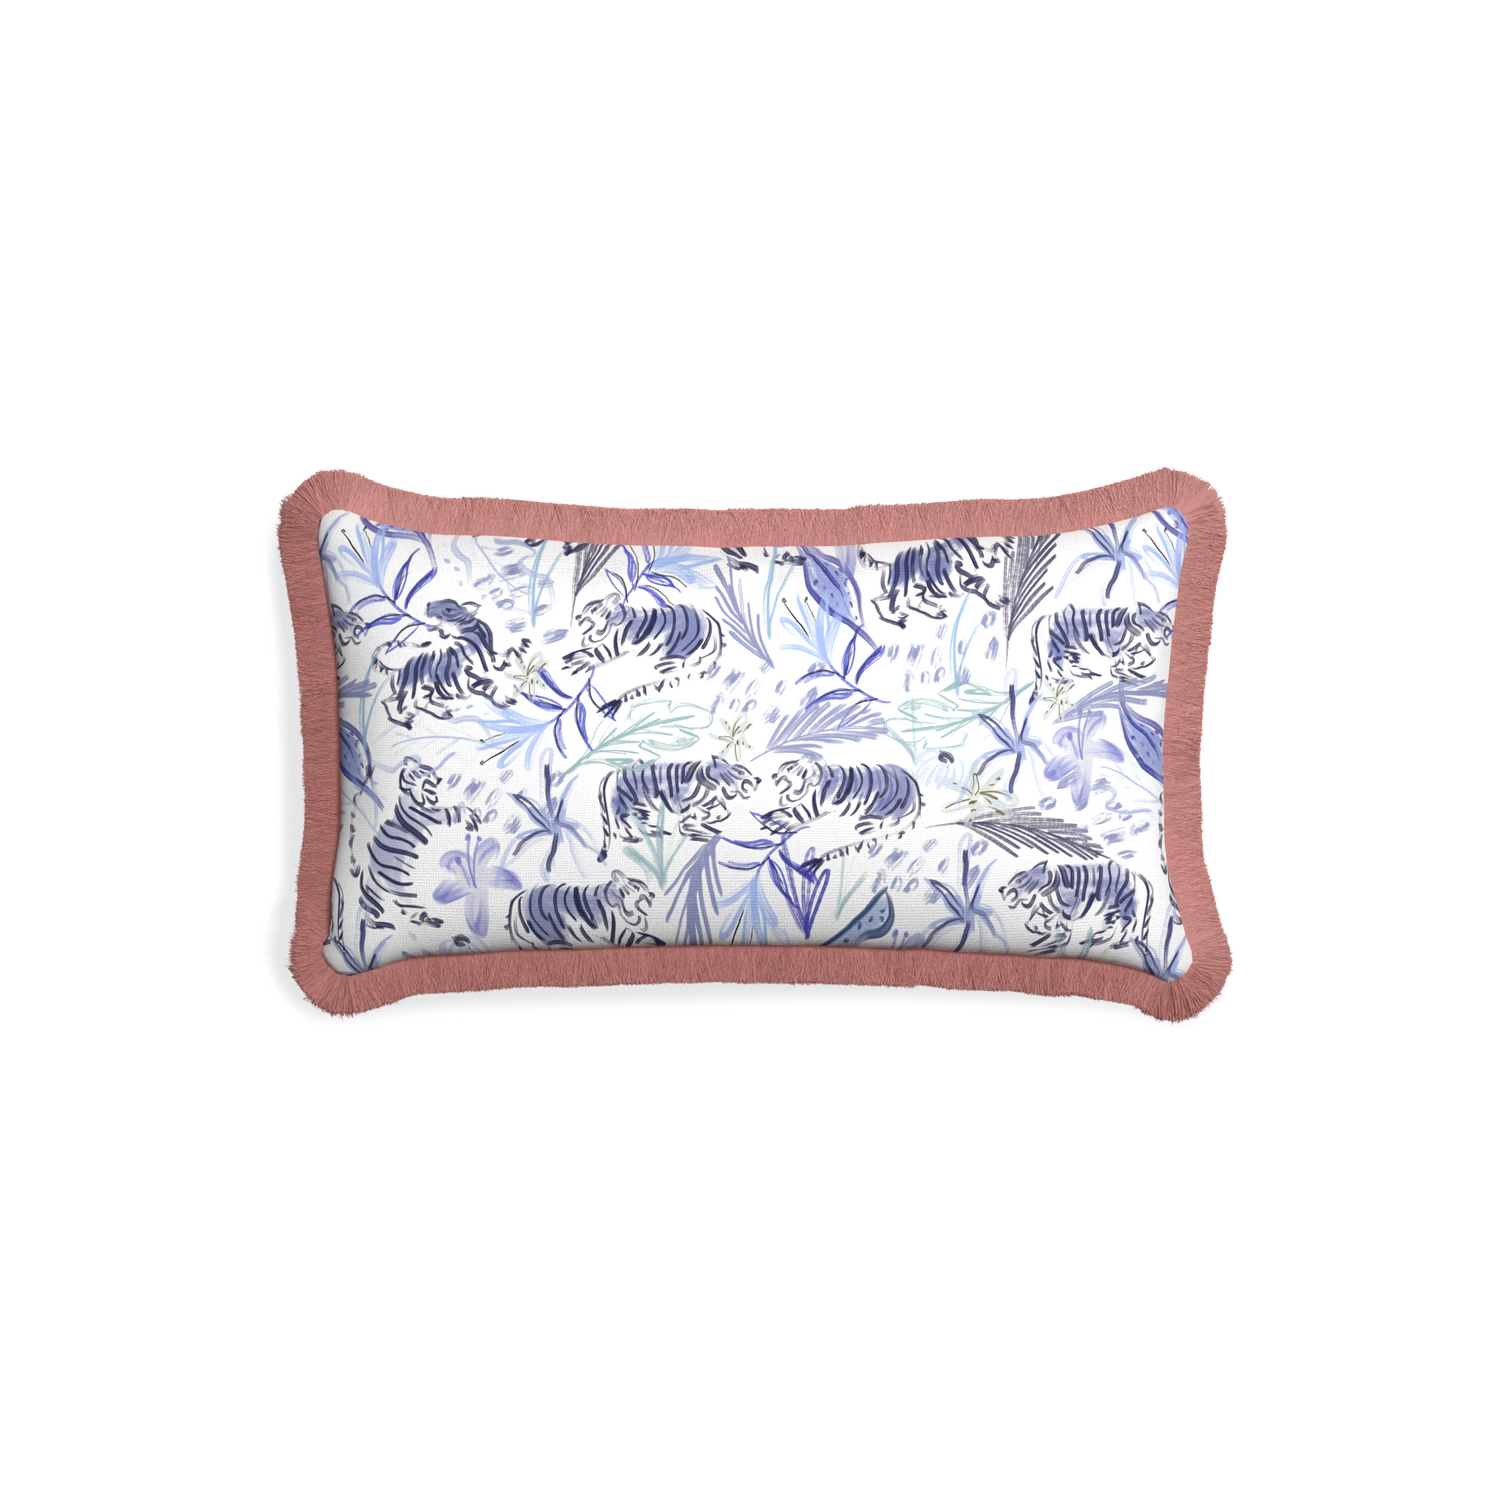 Petite-lumbar frida blue custom blue with intricate tiger designpillow with d fringe on white background